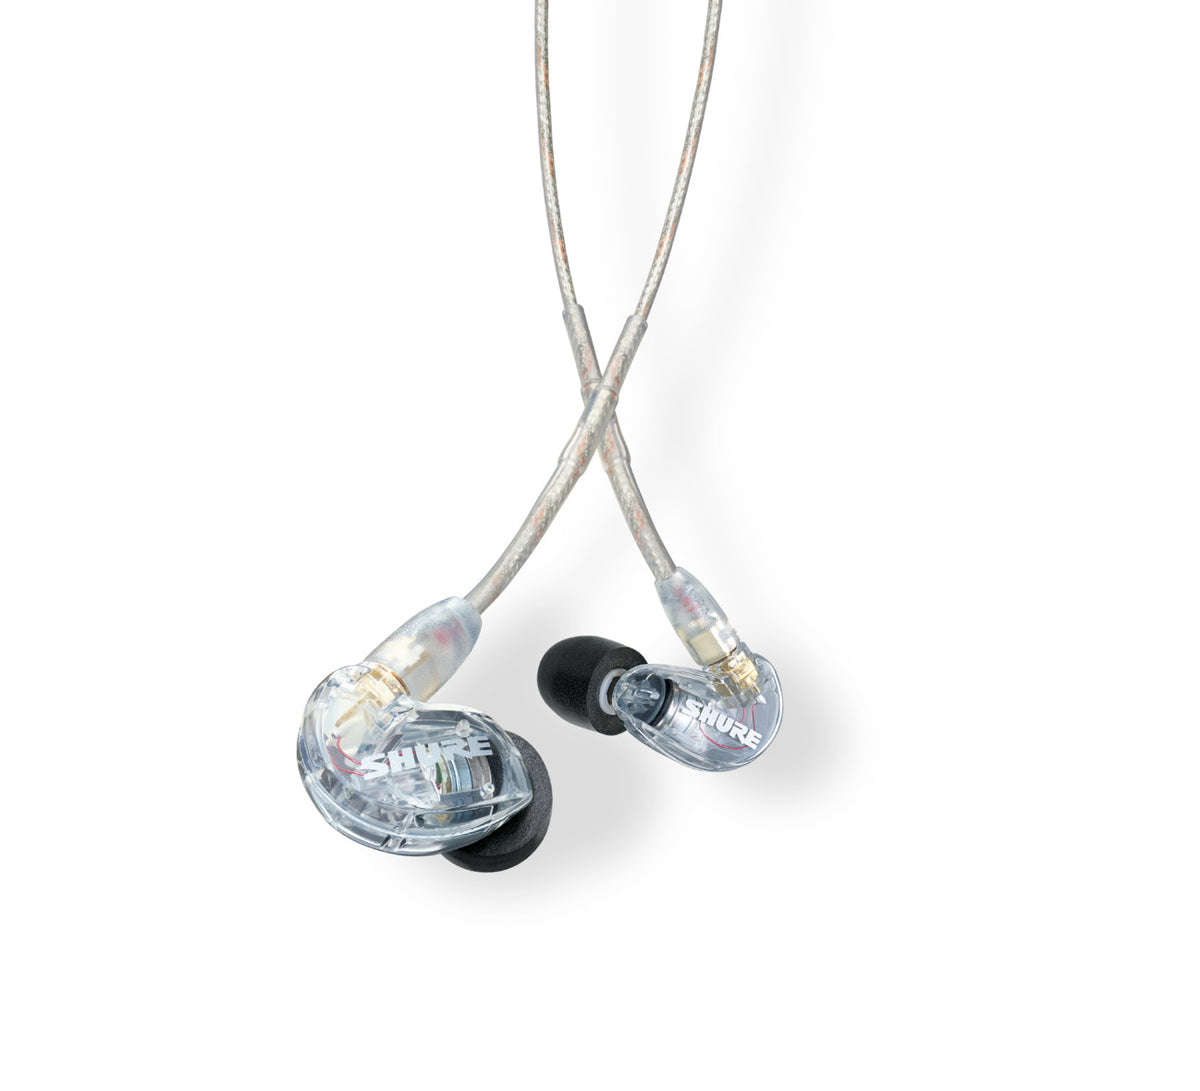 Shure SE215-CL Clear Isolating Earphones with Single Driver